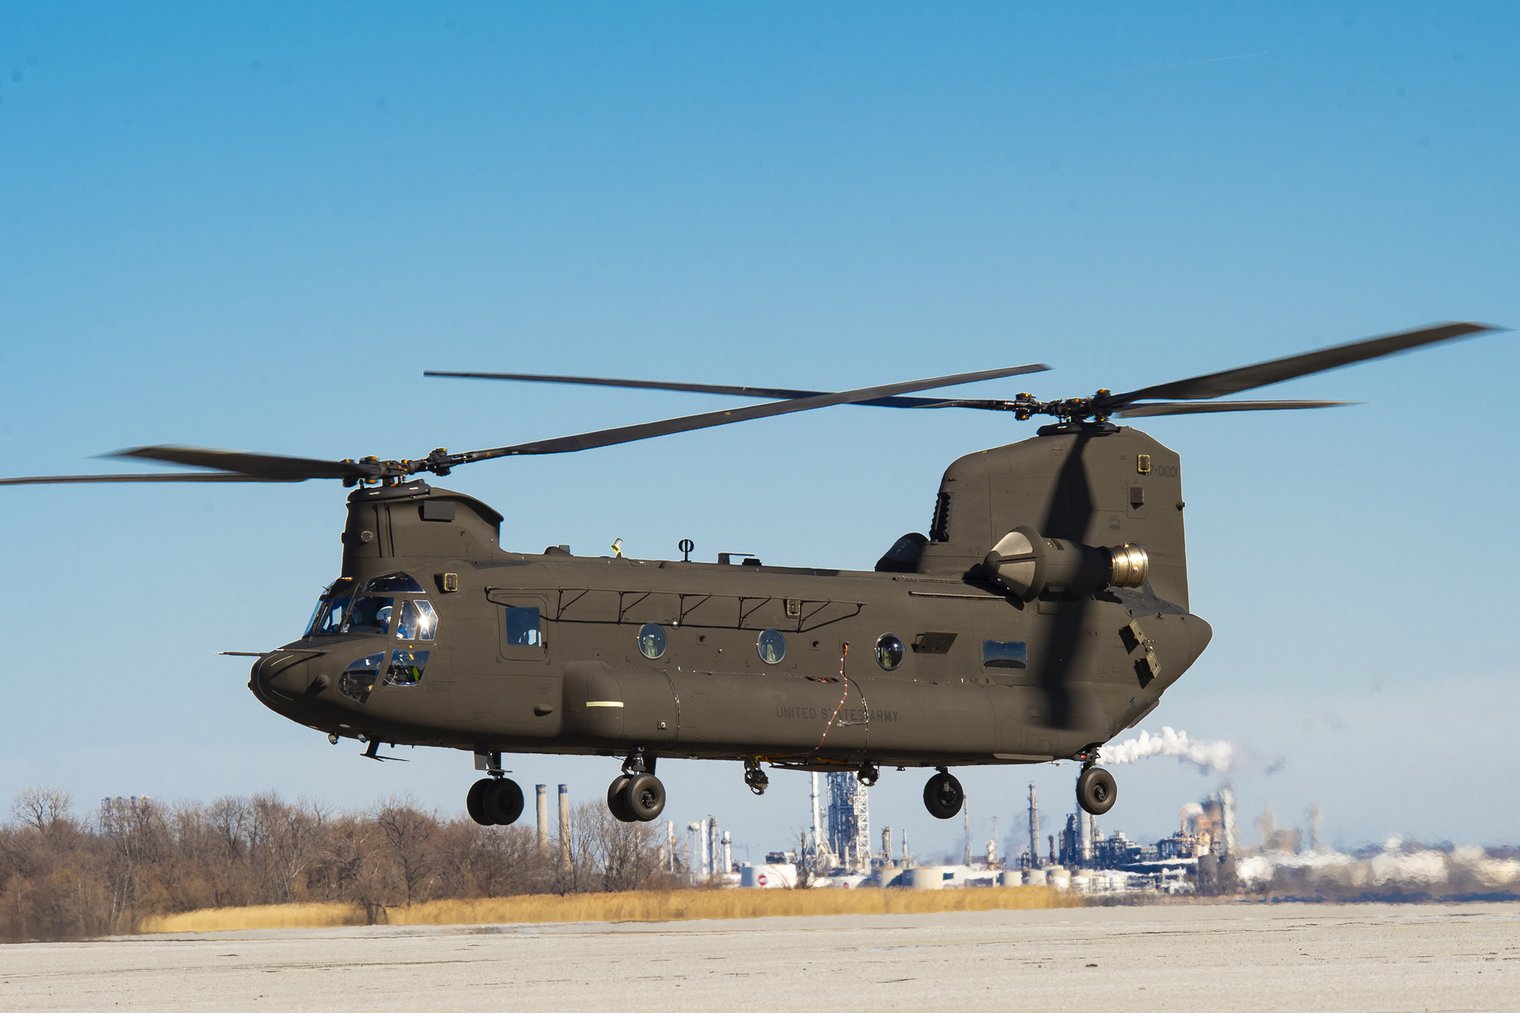 Ch-47d/f / mh-47e chinook helicopter - army technology